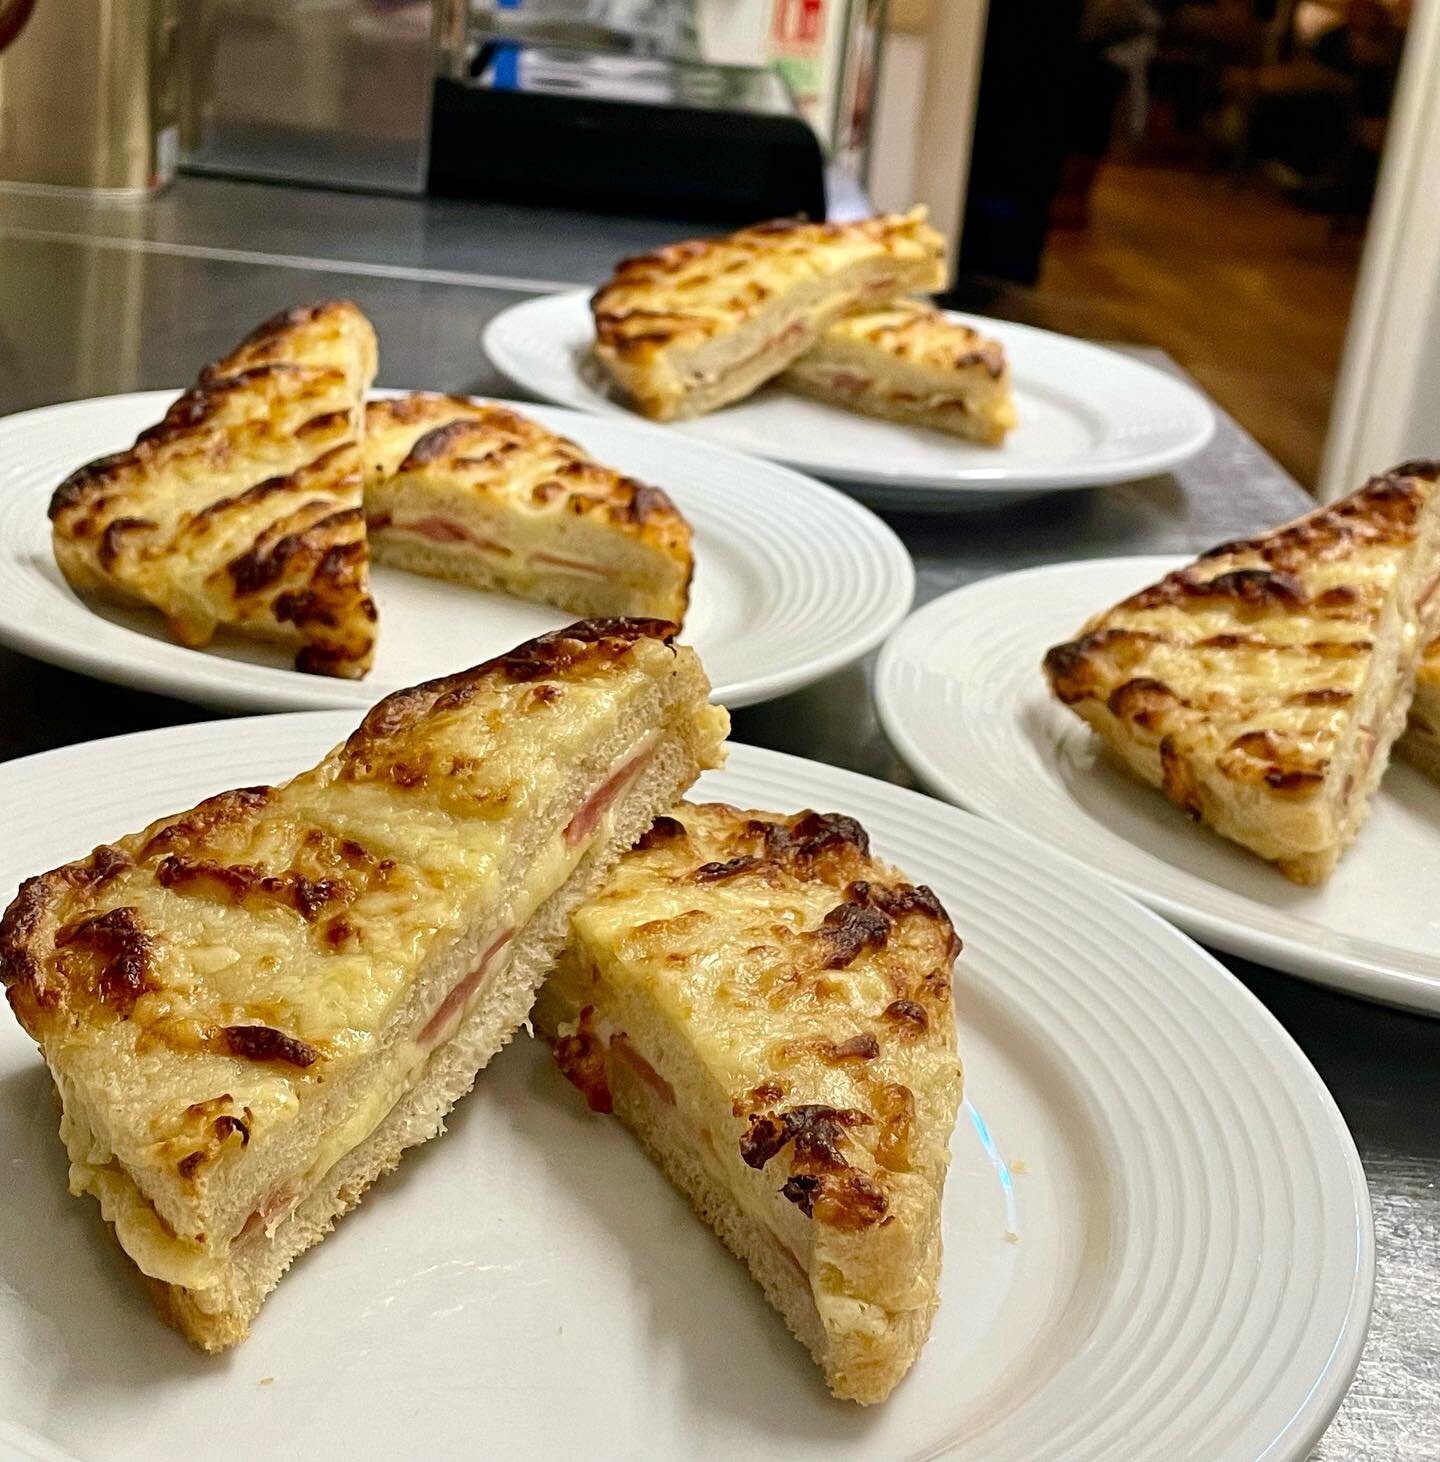 Our croque monsieur makes a great breakfast or snack. Homemade bread toasted &amp; filled with emmenthal cheese &amp; smoked ham then topped with cheesy bechamel. 😋😋😋